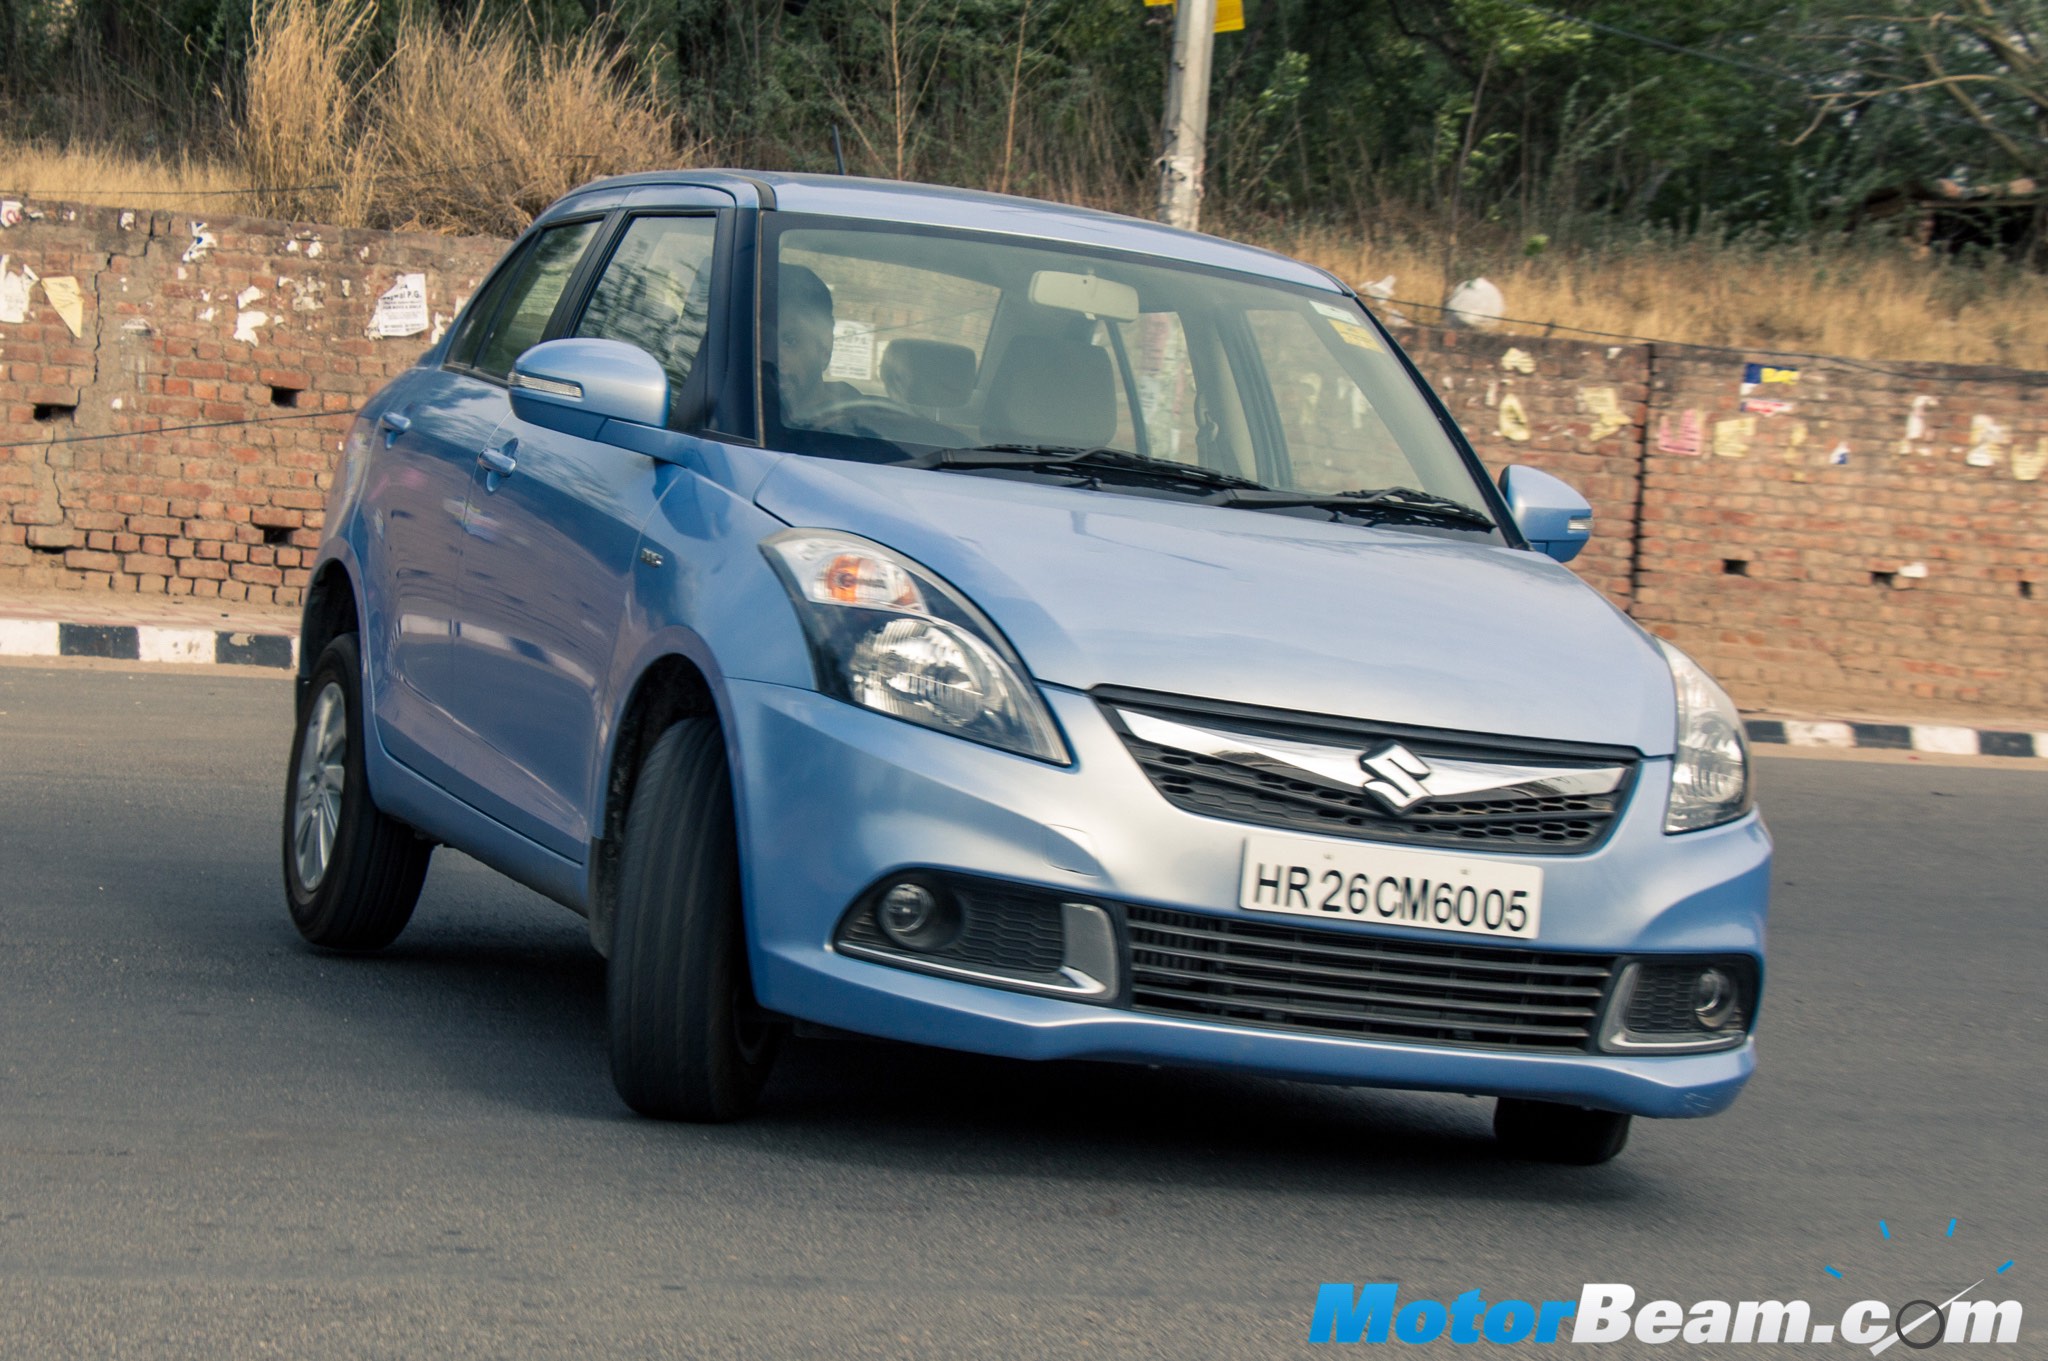 Maruti Swift AMT might launch in the second half of 2016 - Car News